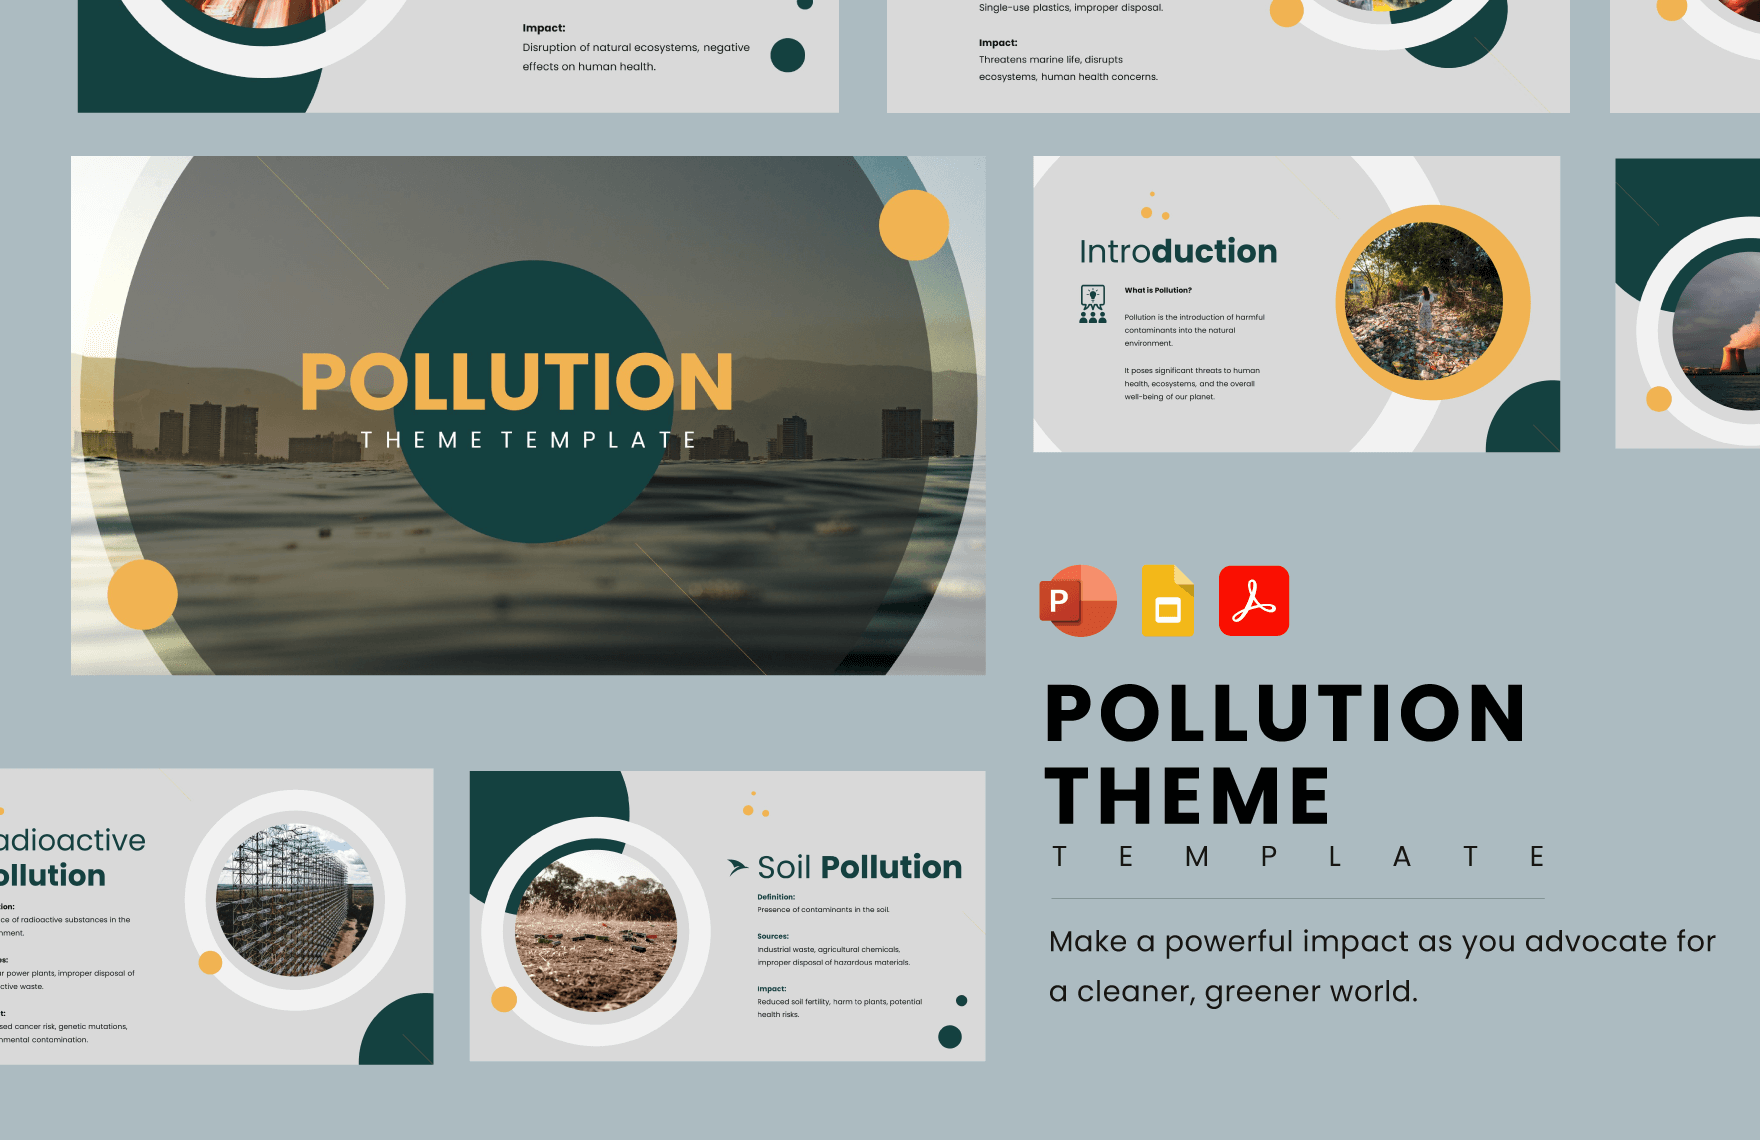 Pollution Theme Template